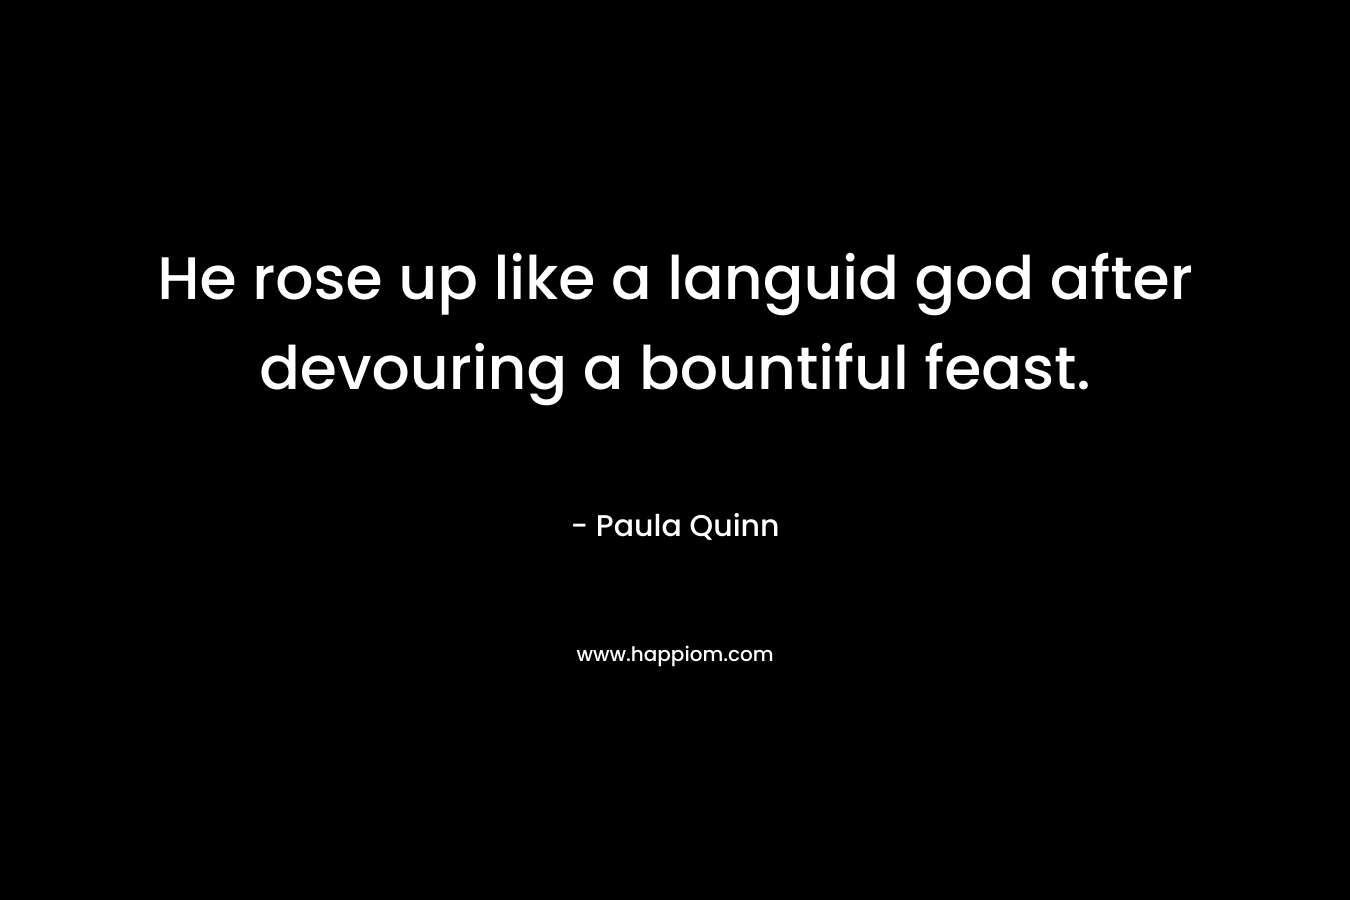 He rose up like a languid god after devouring a bountiful feast. – Paula Quinn